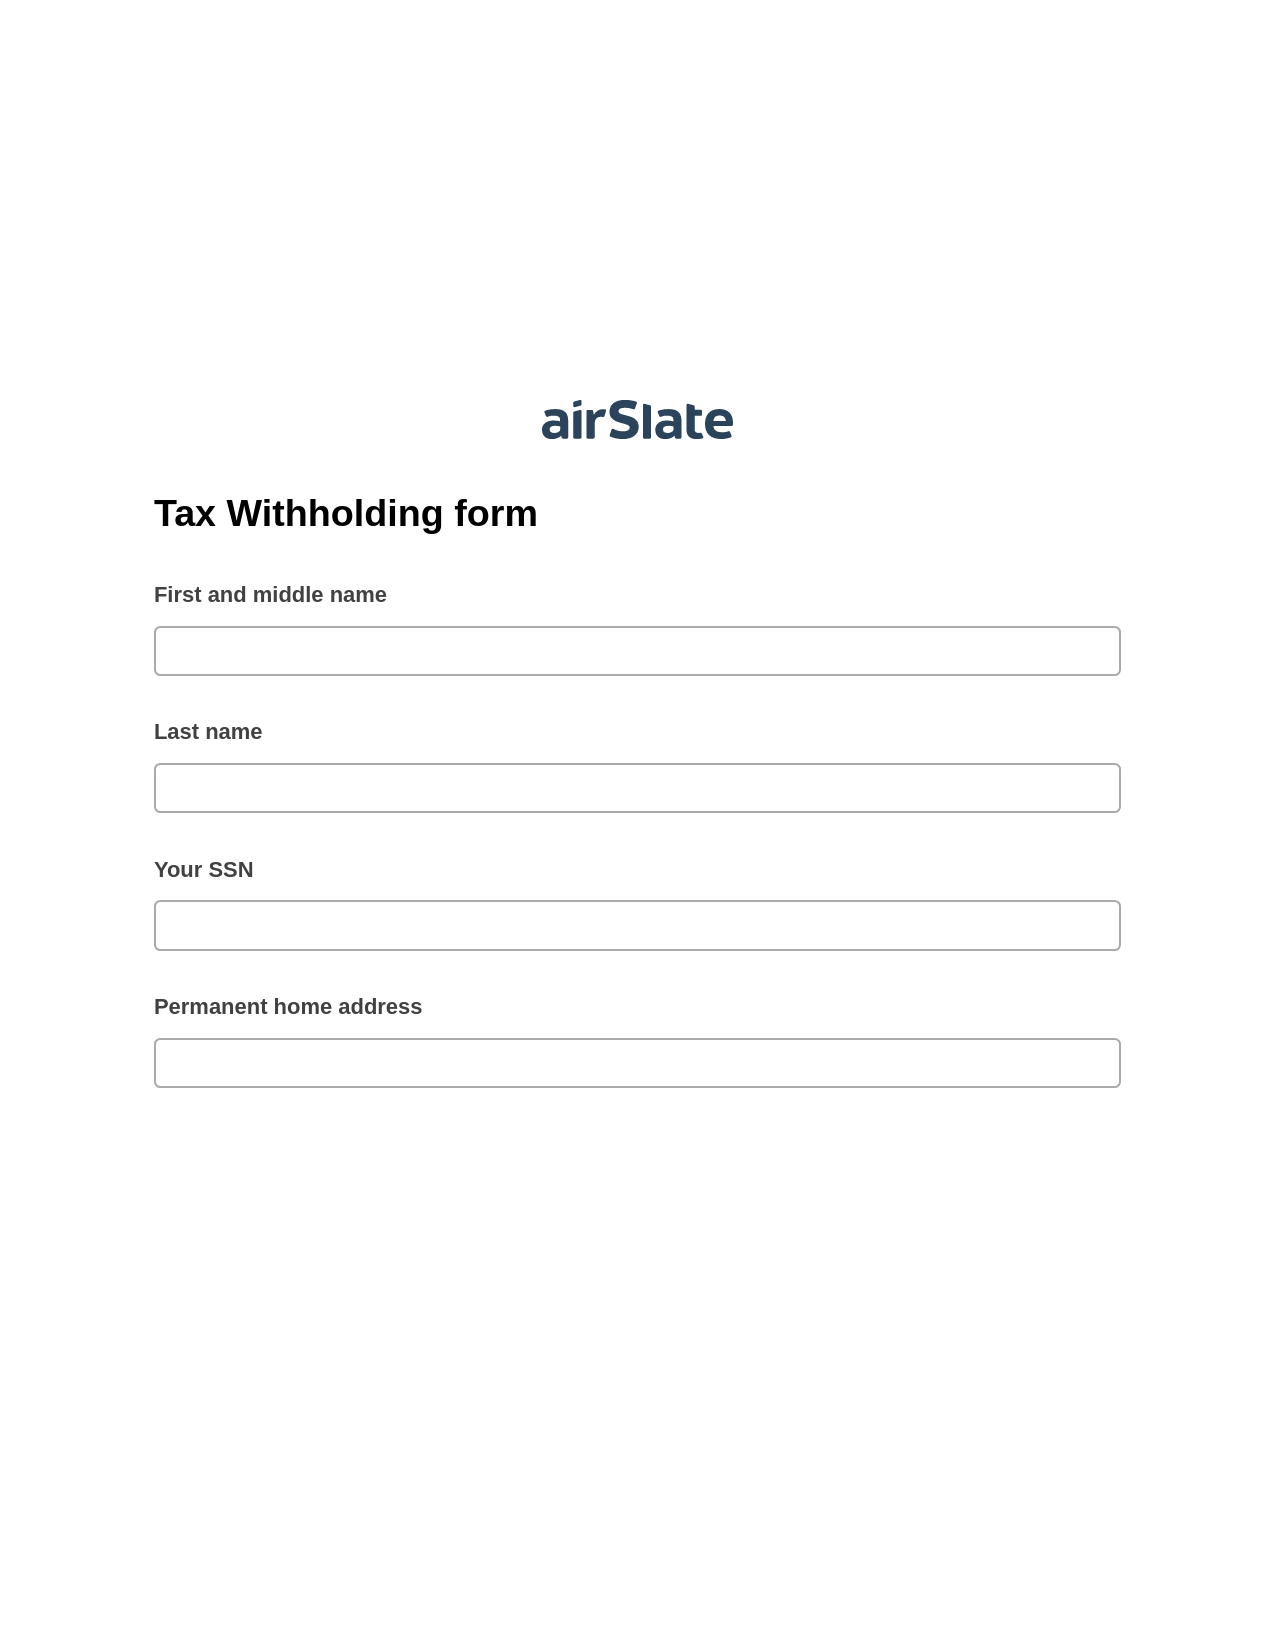 Multirole Tax Withholding form Pre-fill from NetSuite Records Bot, System Bot - Create a Slate in another Flow, Export to MySQL Bot